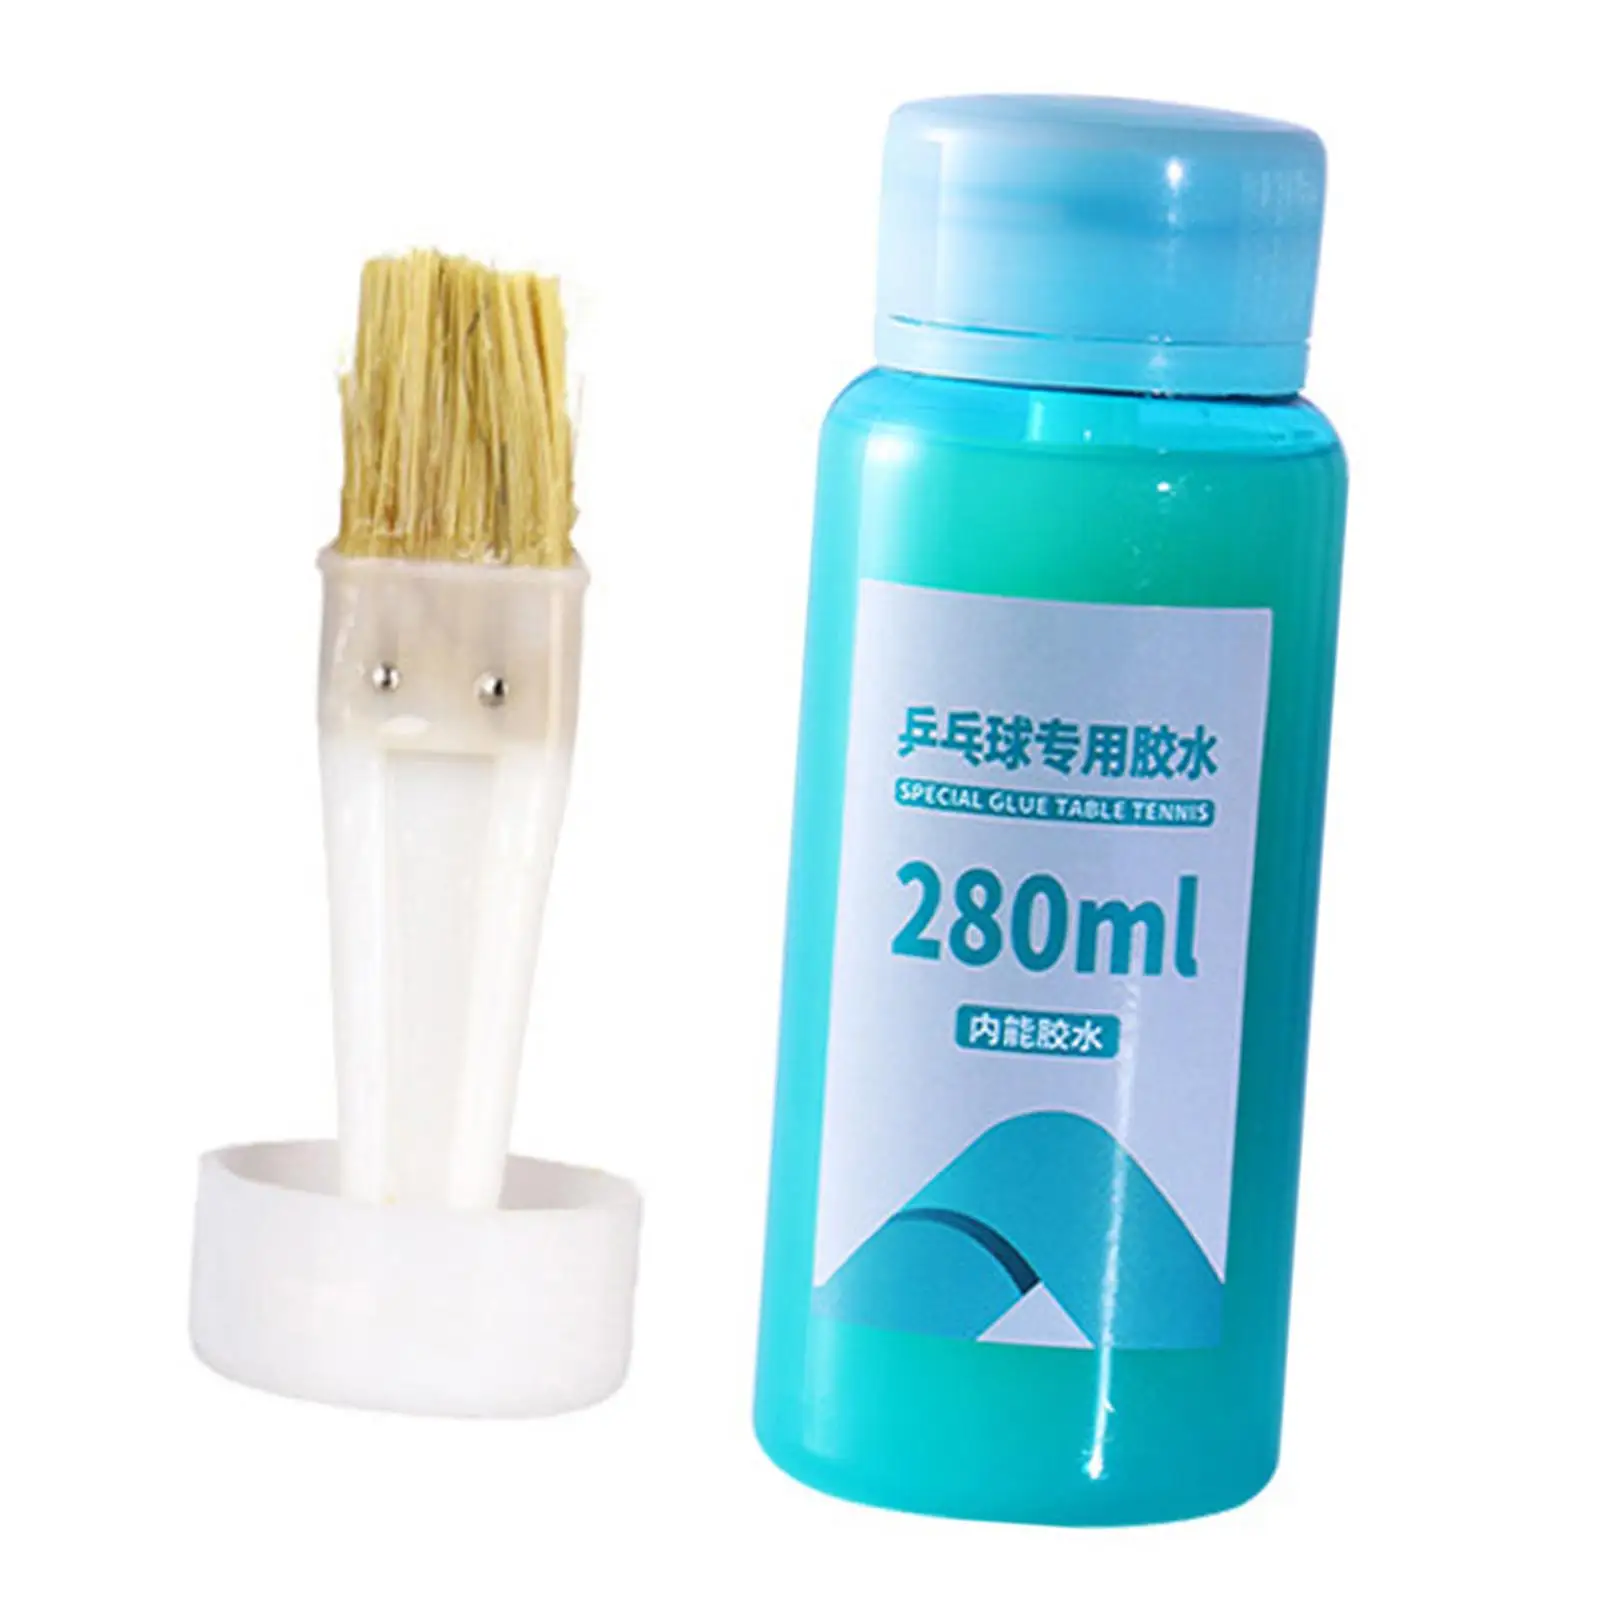 Table Tennis Rackets Glue, Pong Paddle Glue Improve The Ball